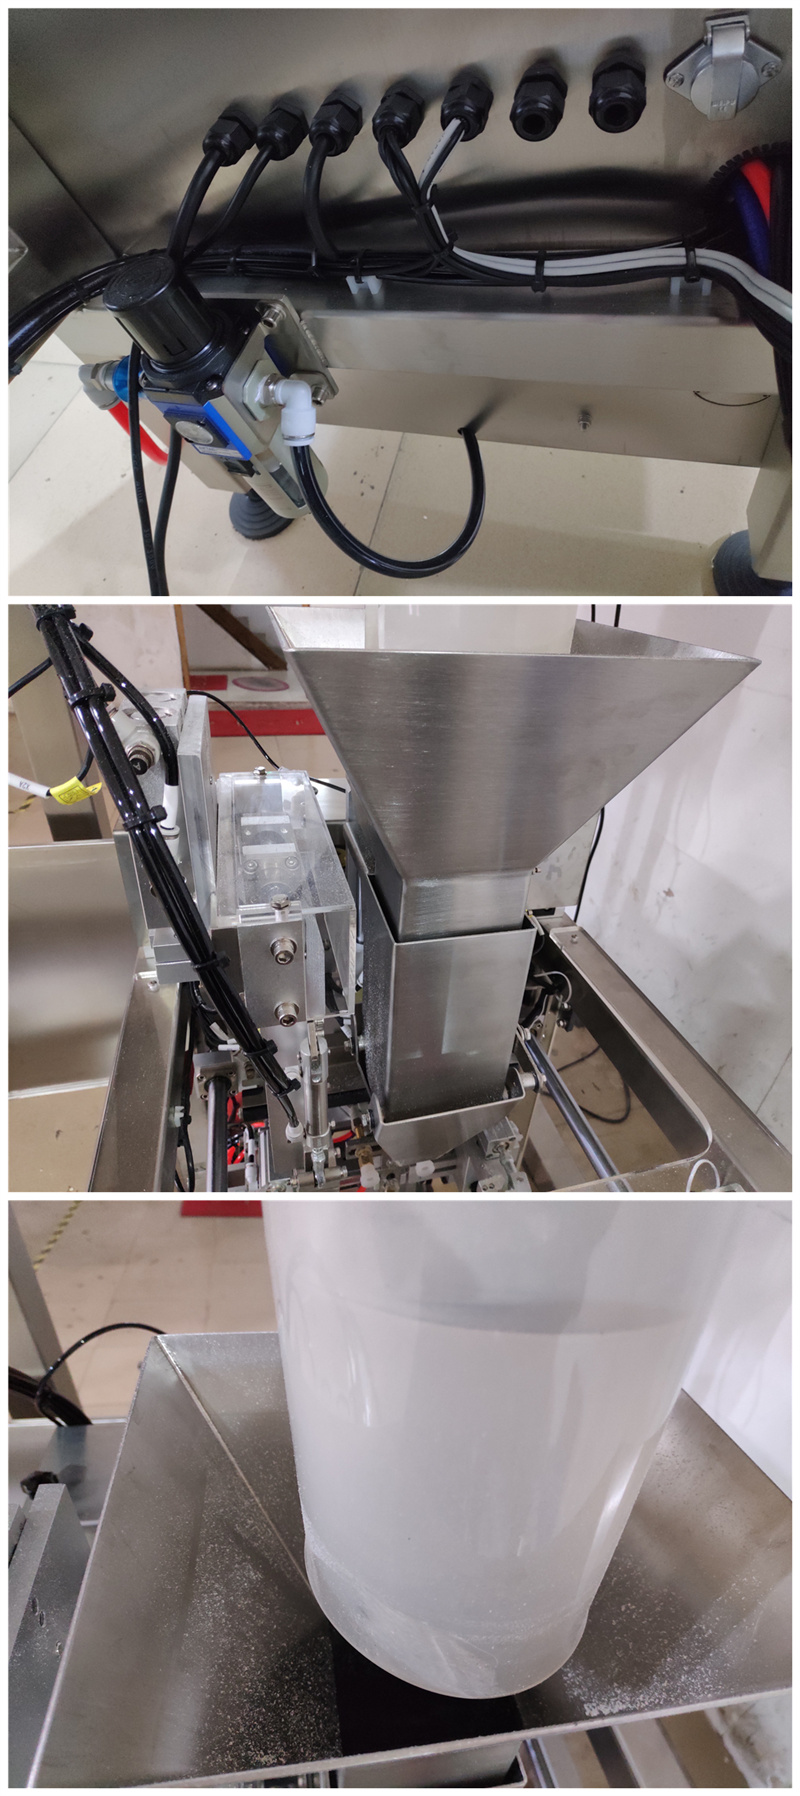 Packaging Machine for Premade Bags with Zipper